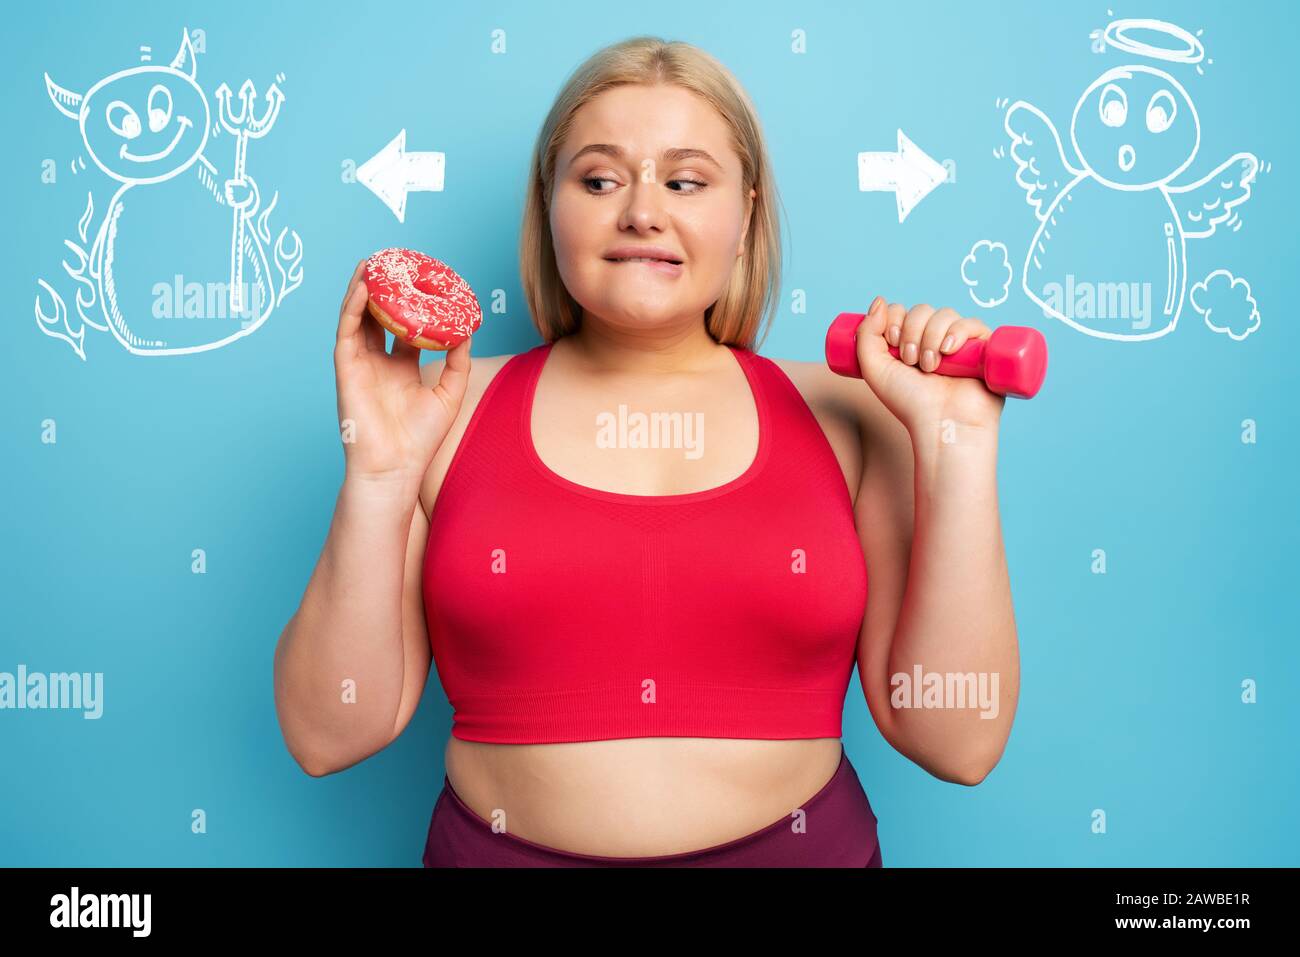 Fat girl thinks to eat donuts instead of does gym. Concept of indecision and doubt with angel and devil suggestion Stock Photo